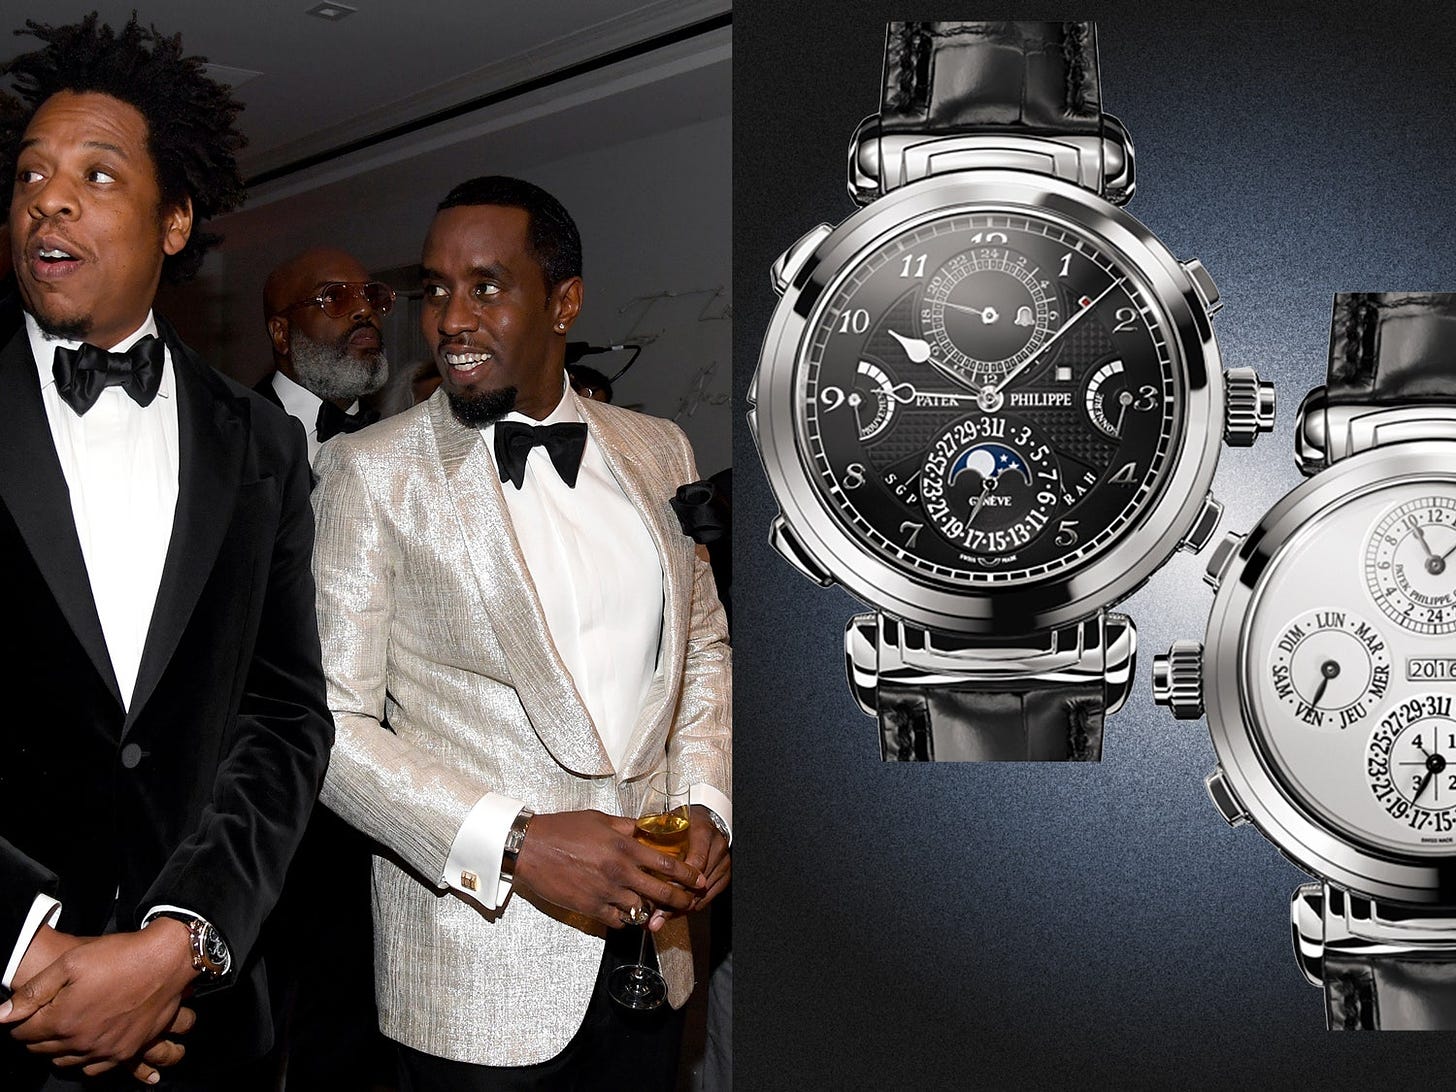 Jay-Z Outdid Himself With This $2.2 Million Patek Philippe | GQ